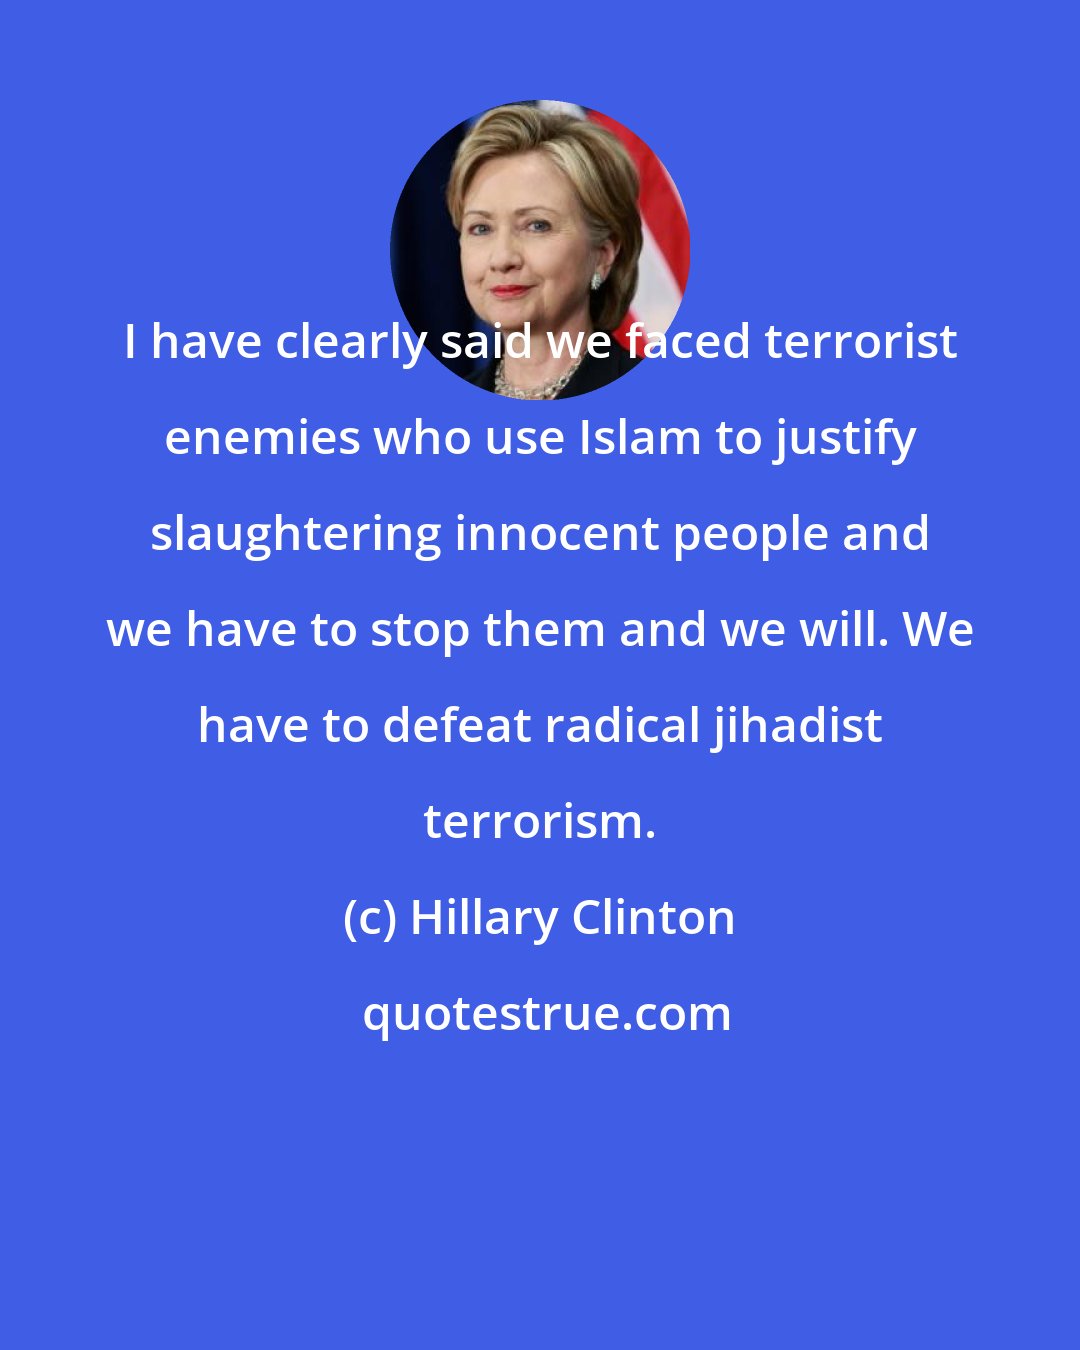 Hillary Clinton: I have clearly said we faced terrorist enemies who use Islam to justify slaughtering innocent people and we have to stop them and we will. We have to defeat radical jihadist terrorism.